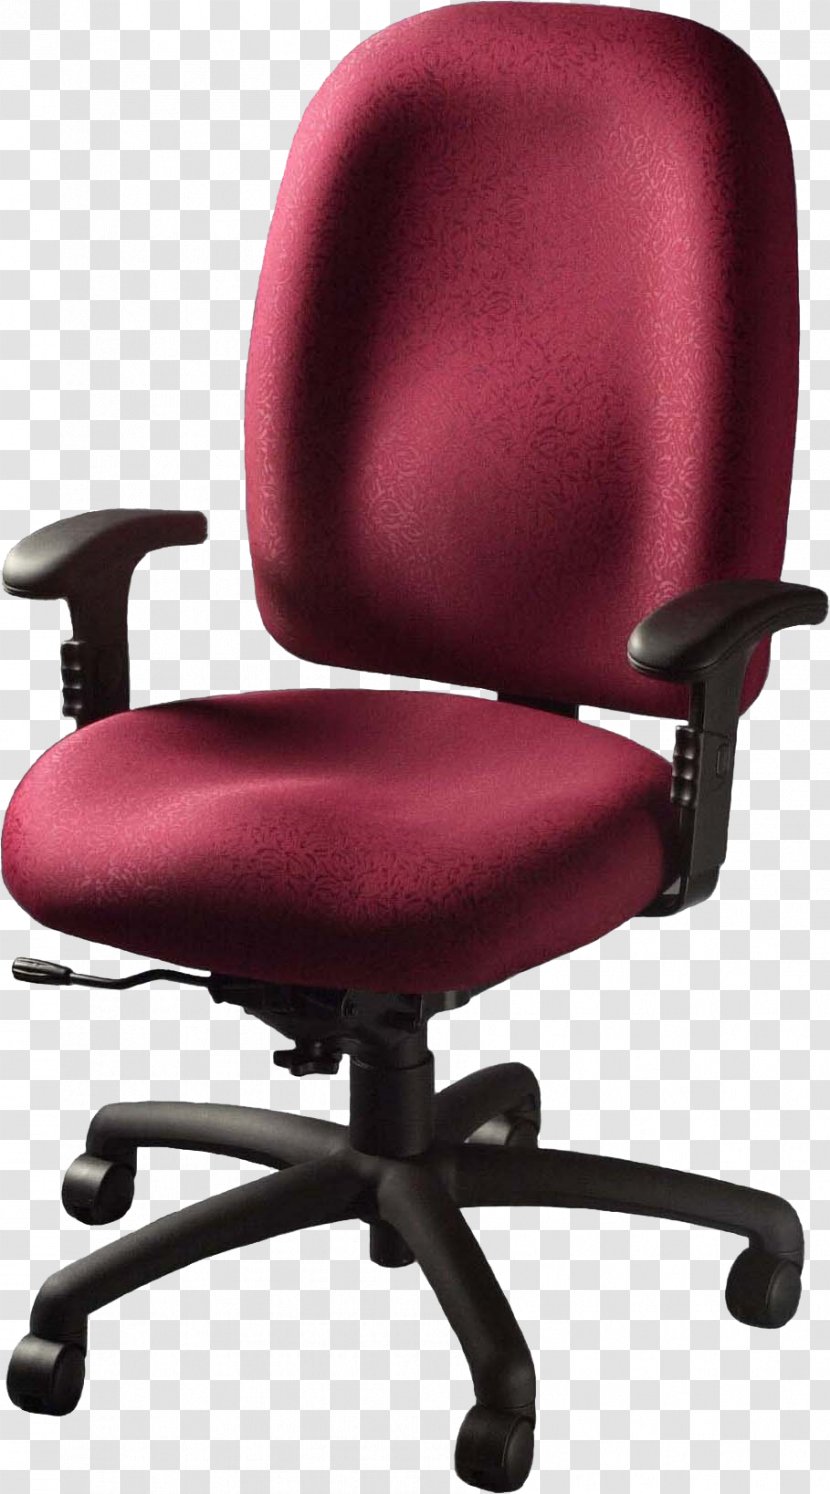 Office & Desk Chairs Furniture - Comfort - Chair Transparent PNG